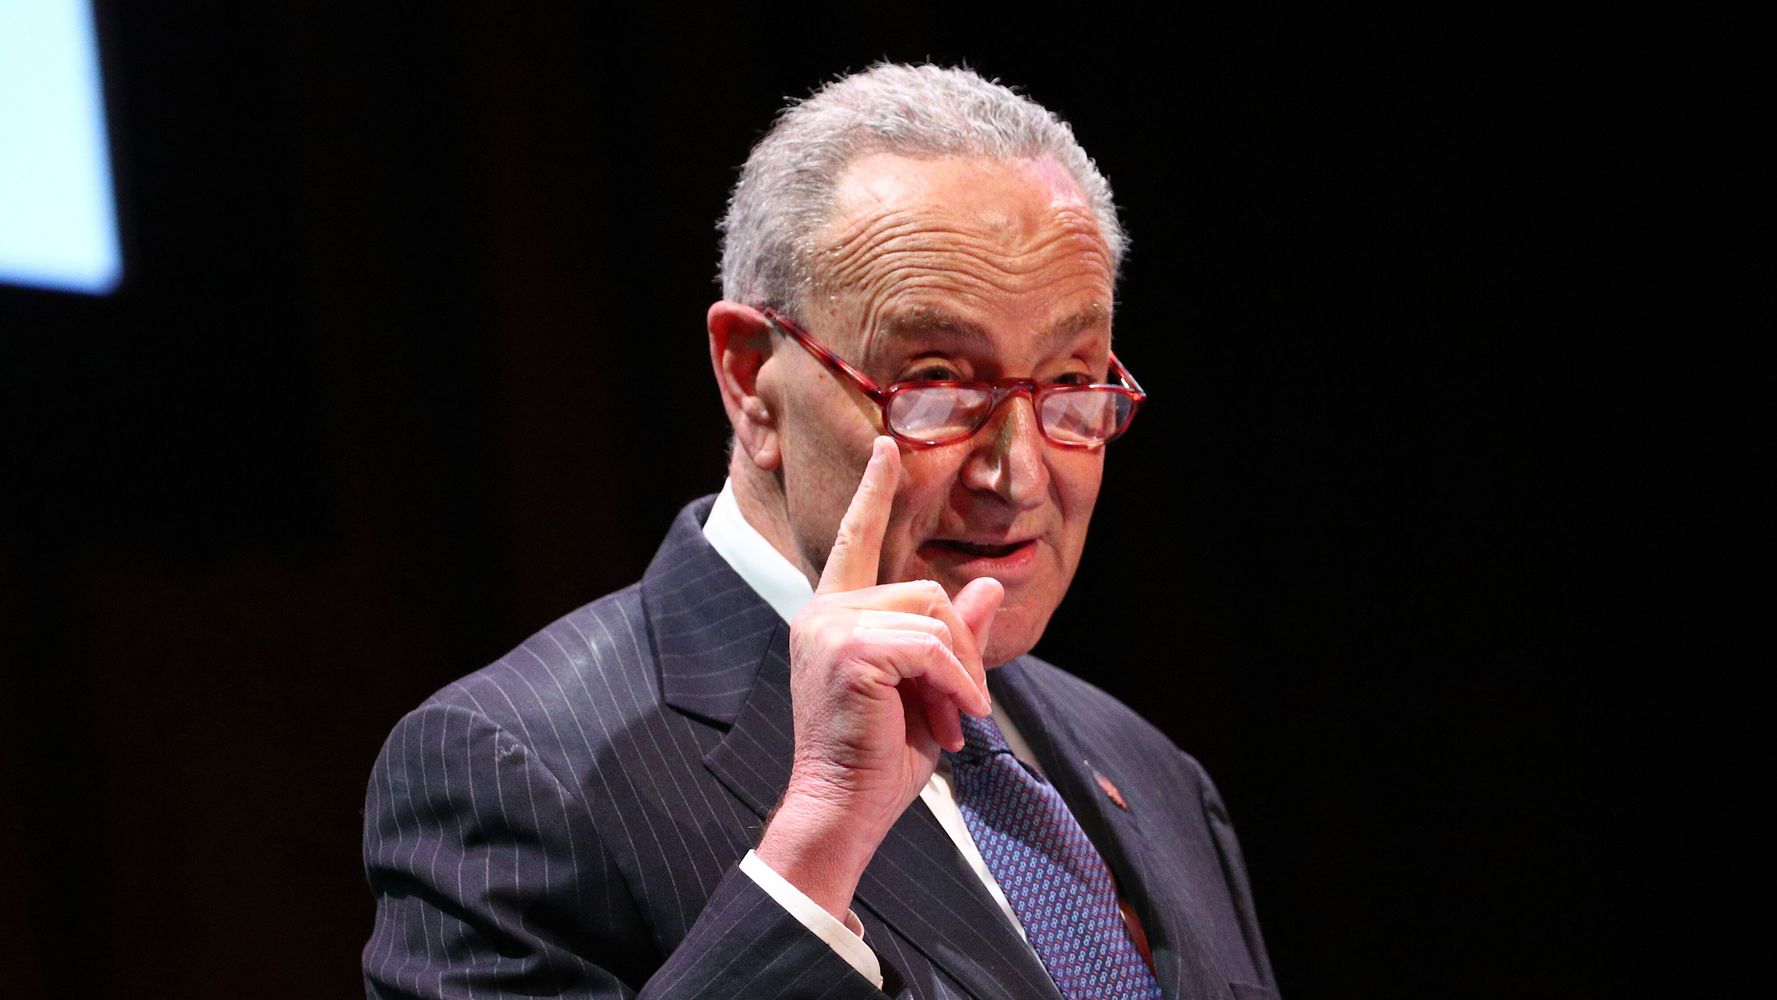 Schumer Vows To Press Ahead With Filibuster Reform: ‘We Will Never Give Up’